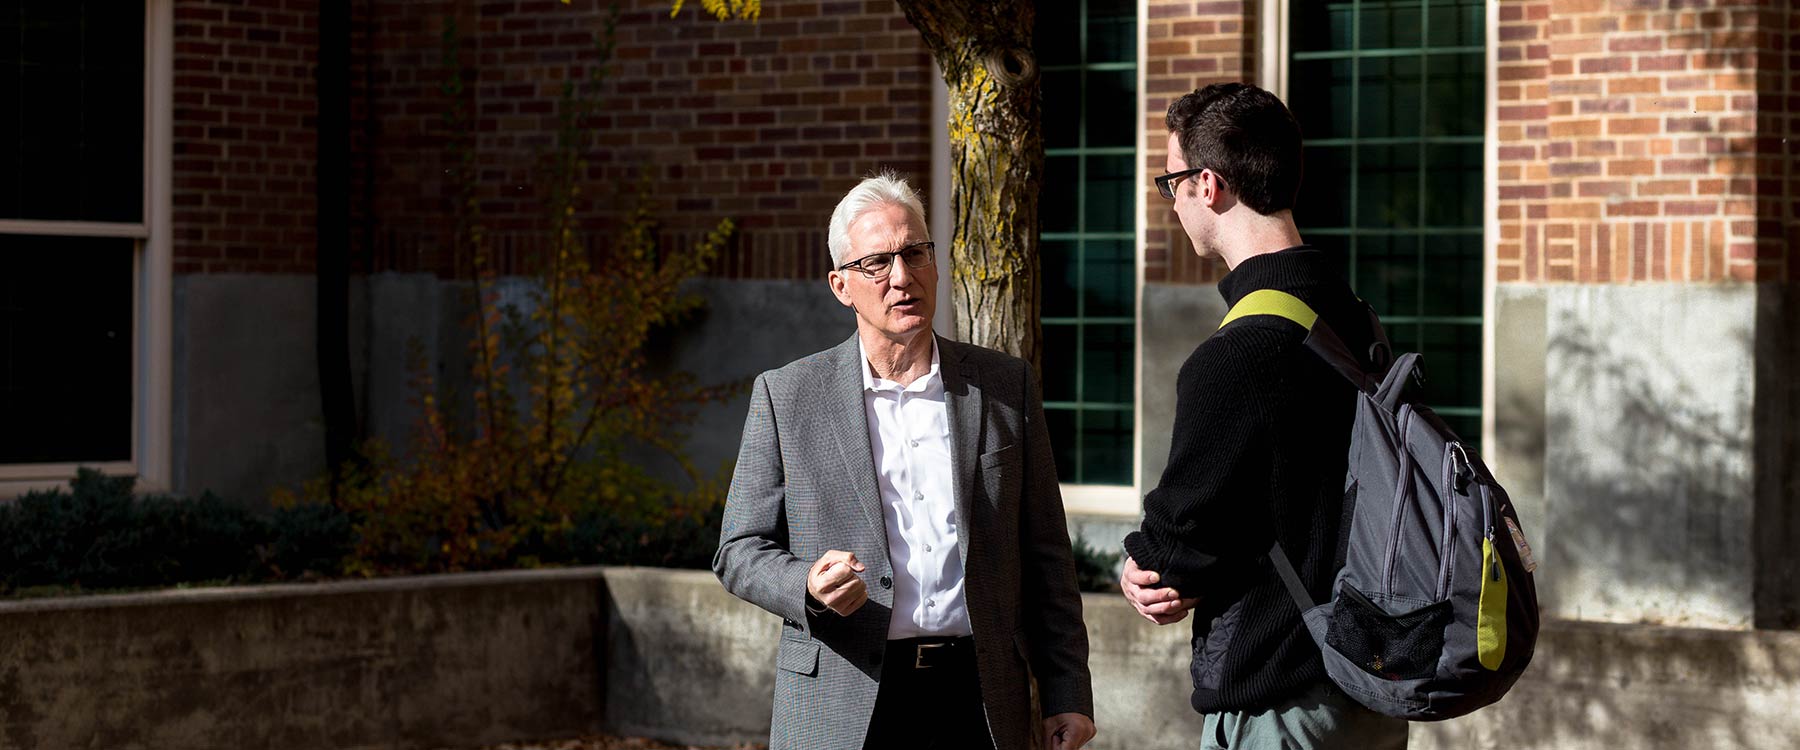 A professor stands and speaks with a student outside a large academic building in the sun.